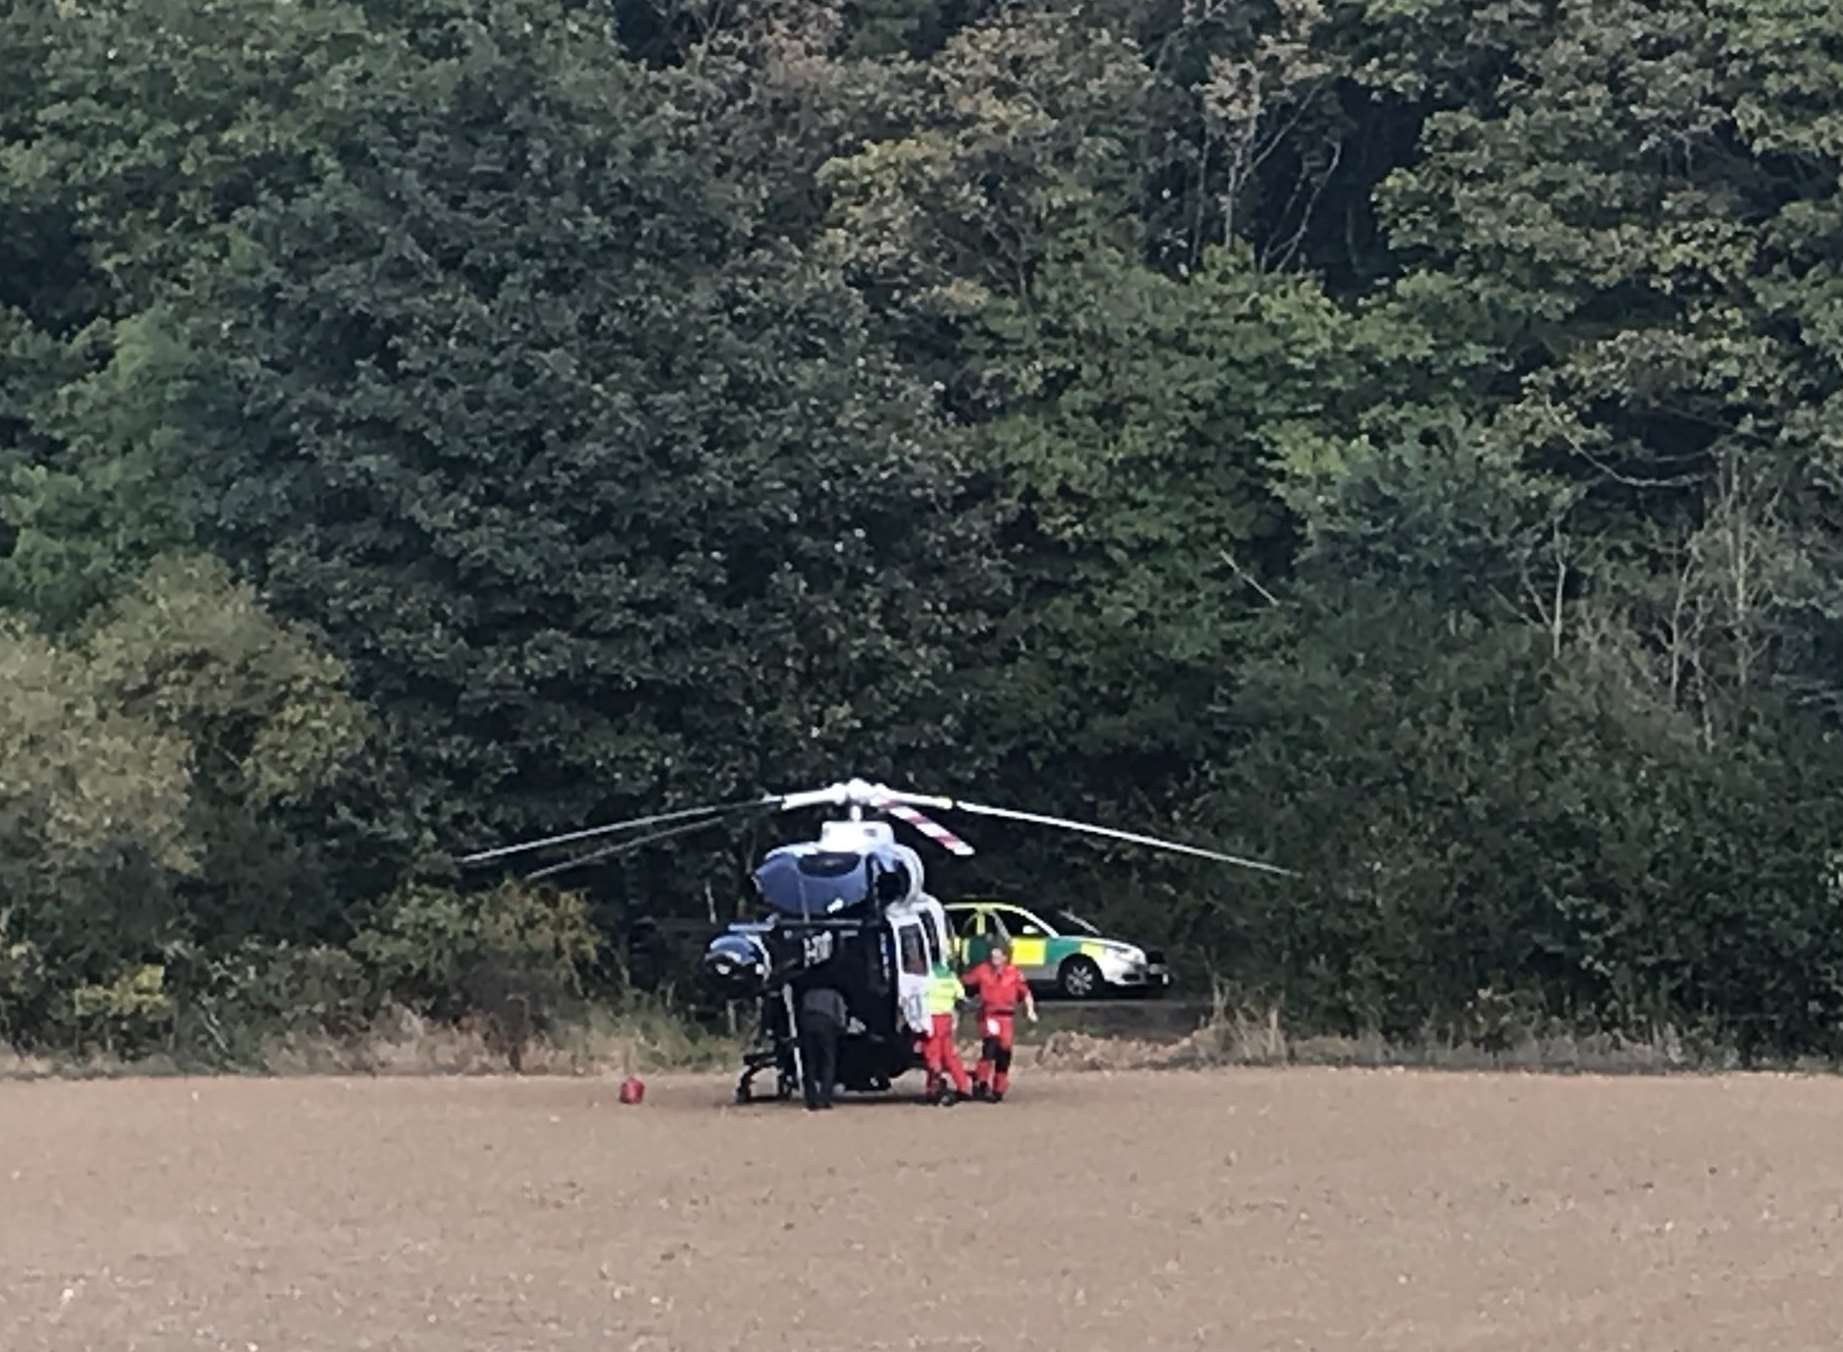 The air ambulance landed in a nearby field. Picture: @cedricelf on Twitter